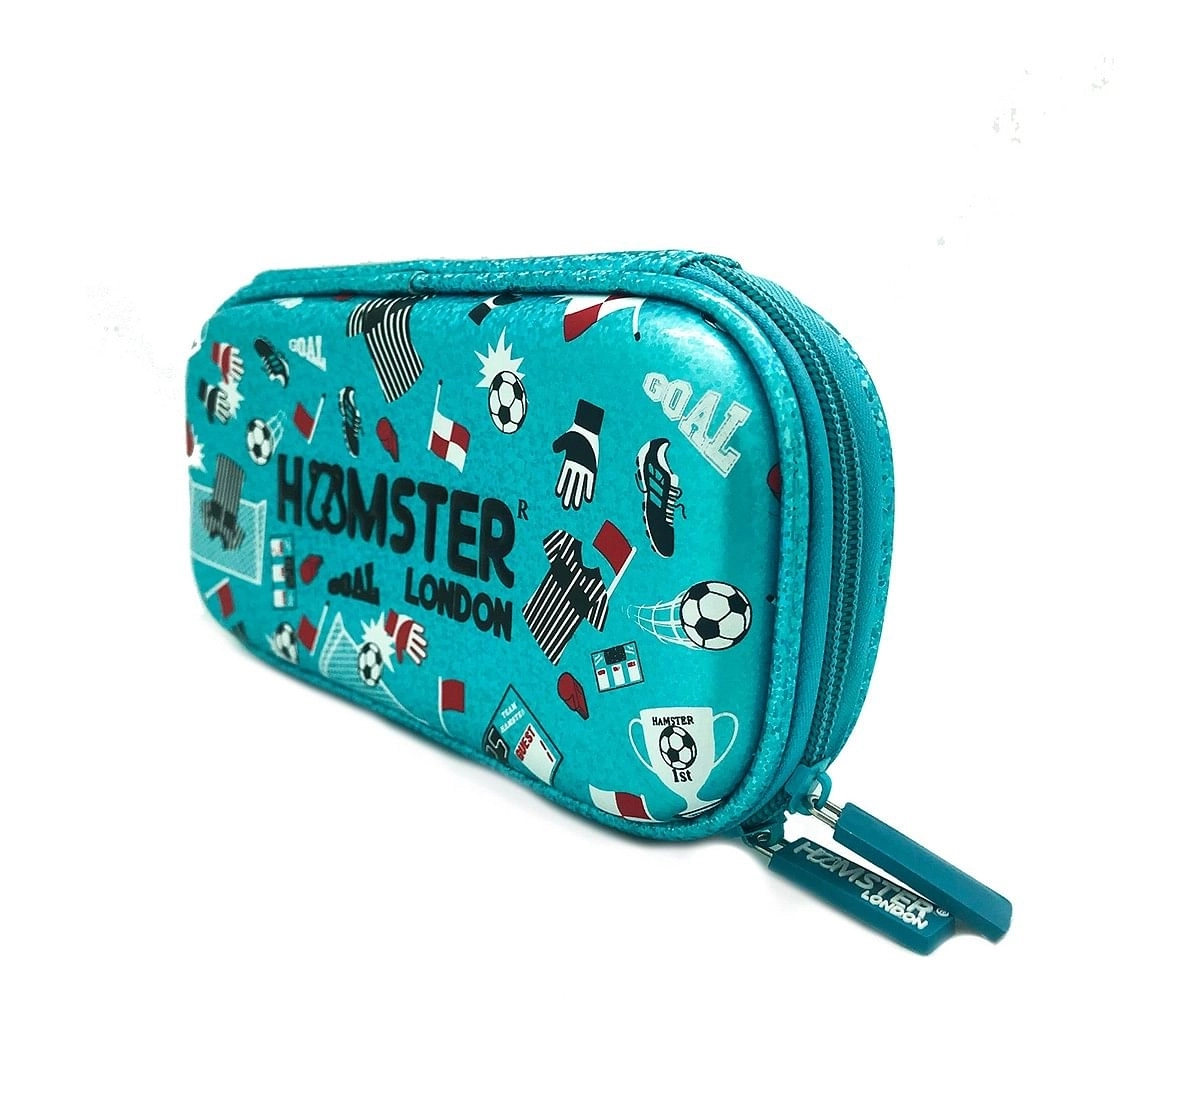 Hamster London Small Football Stationery Hardcase for age 3Y+ (Blue)